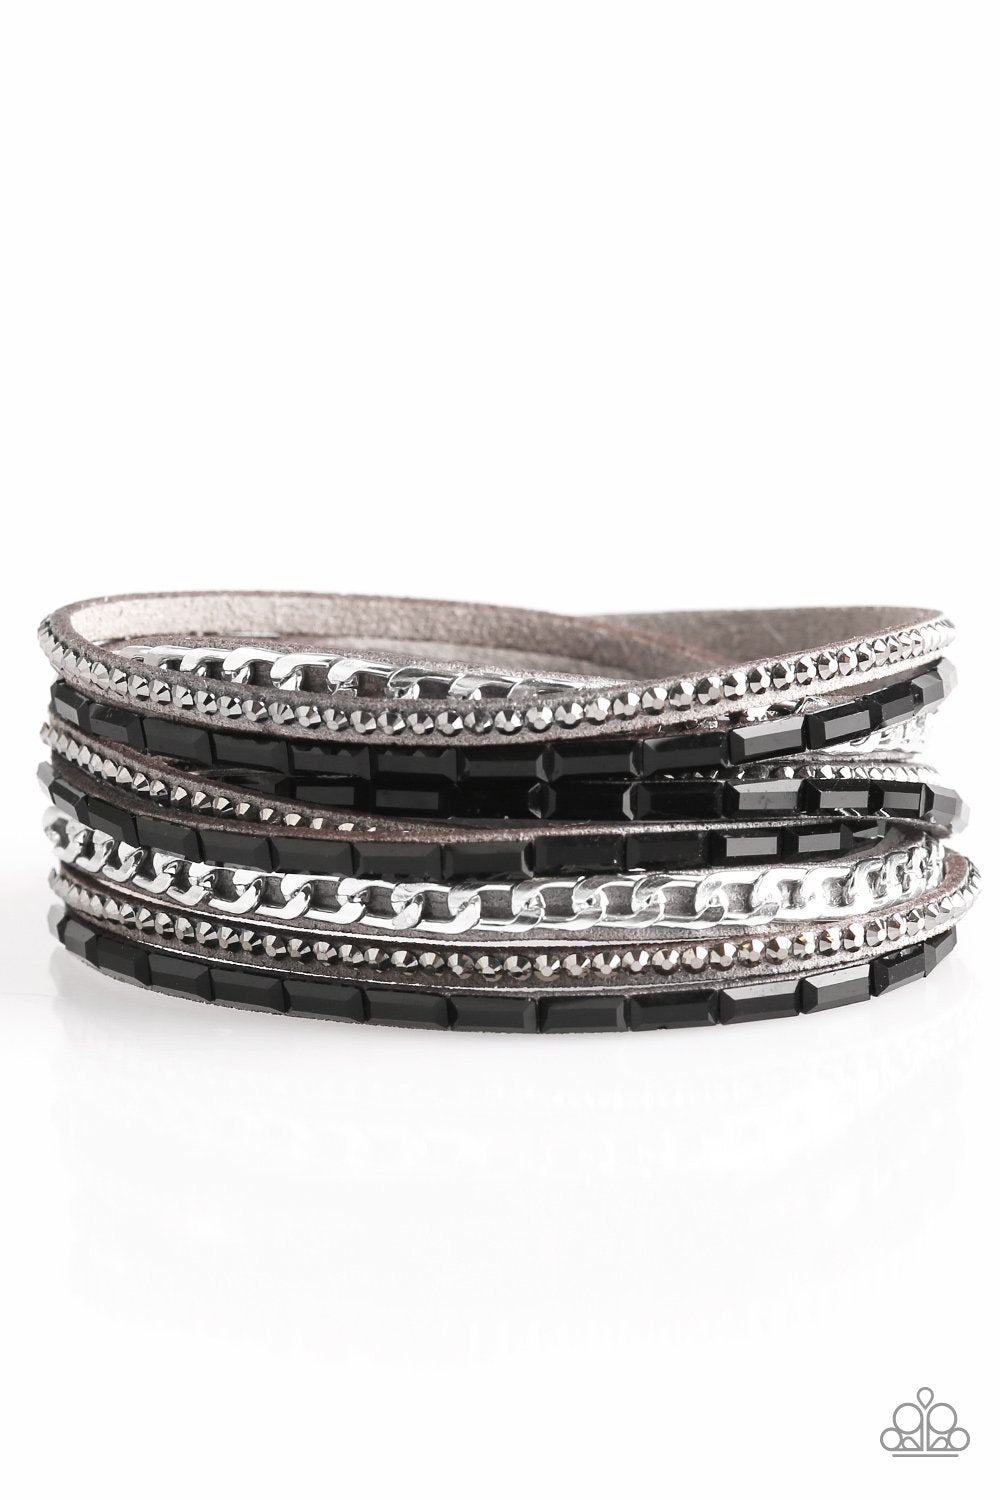 Cheaters Never Prosper Black and Silver Urban Double-wrap Snap Bracelet - Paparazzi Accessories-CarasShop.com - $5 Jewelry by Cara Jewels